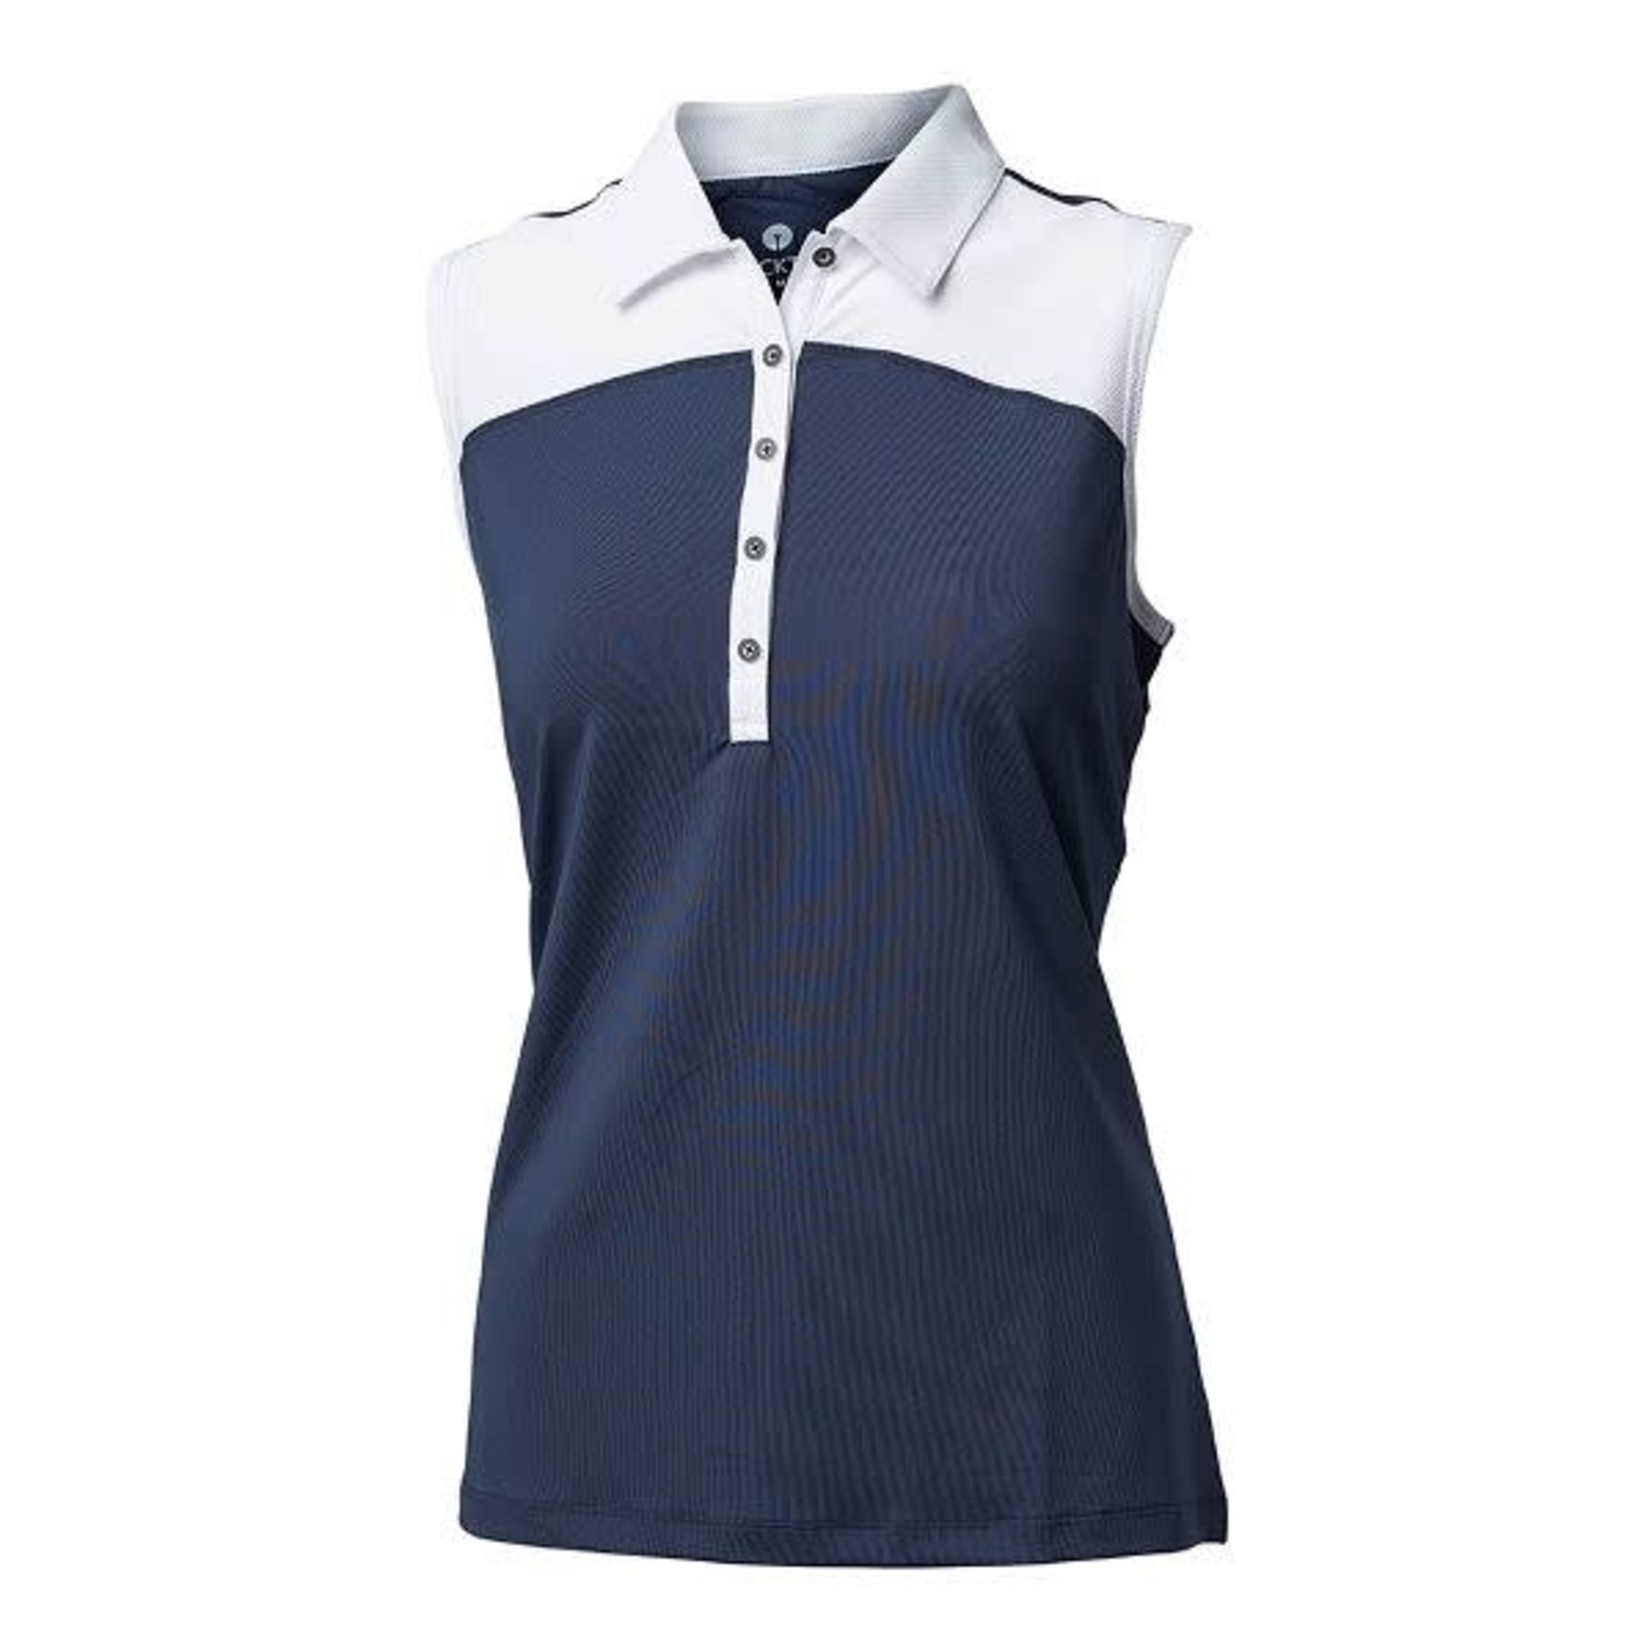 Backtee Backtee Ladies Colour Sleeveless navy/white XL